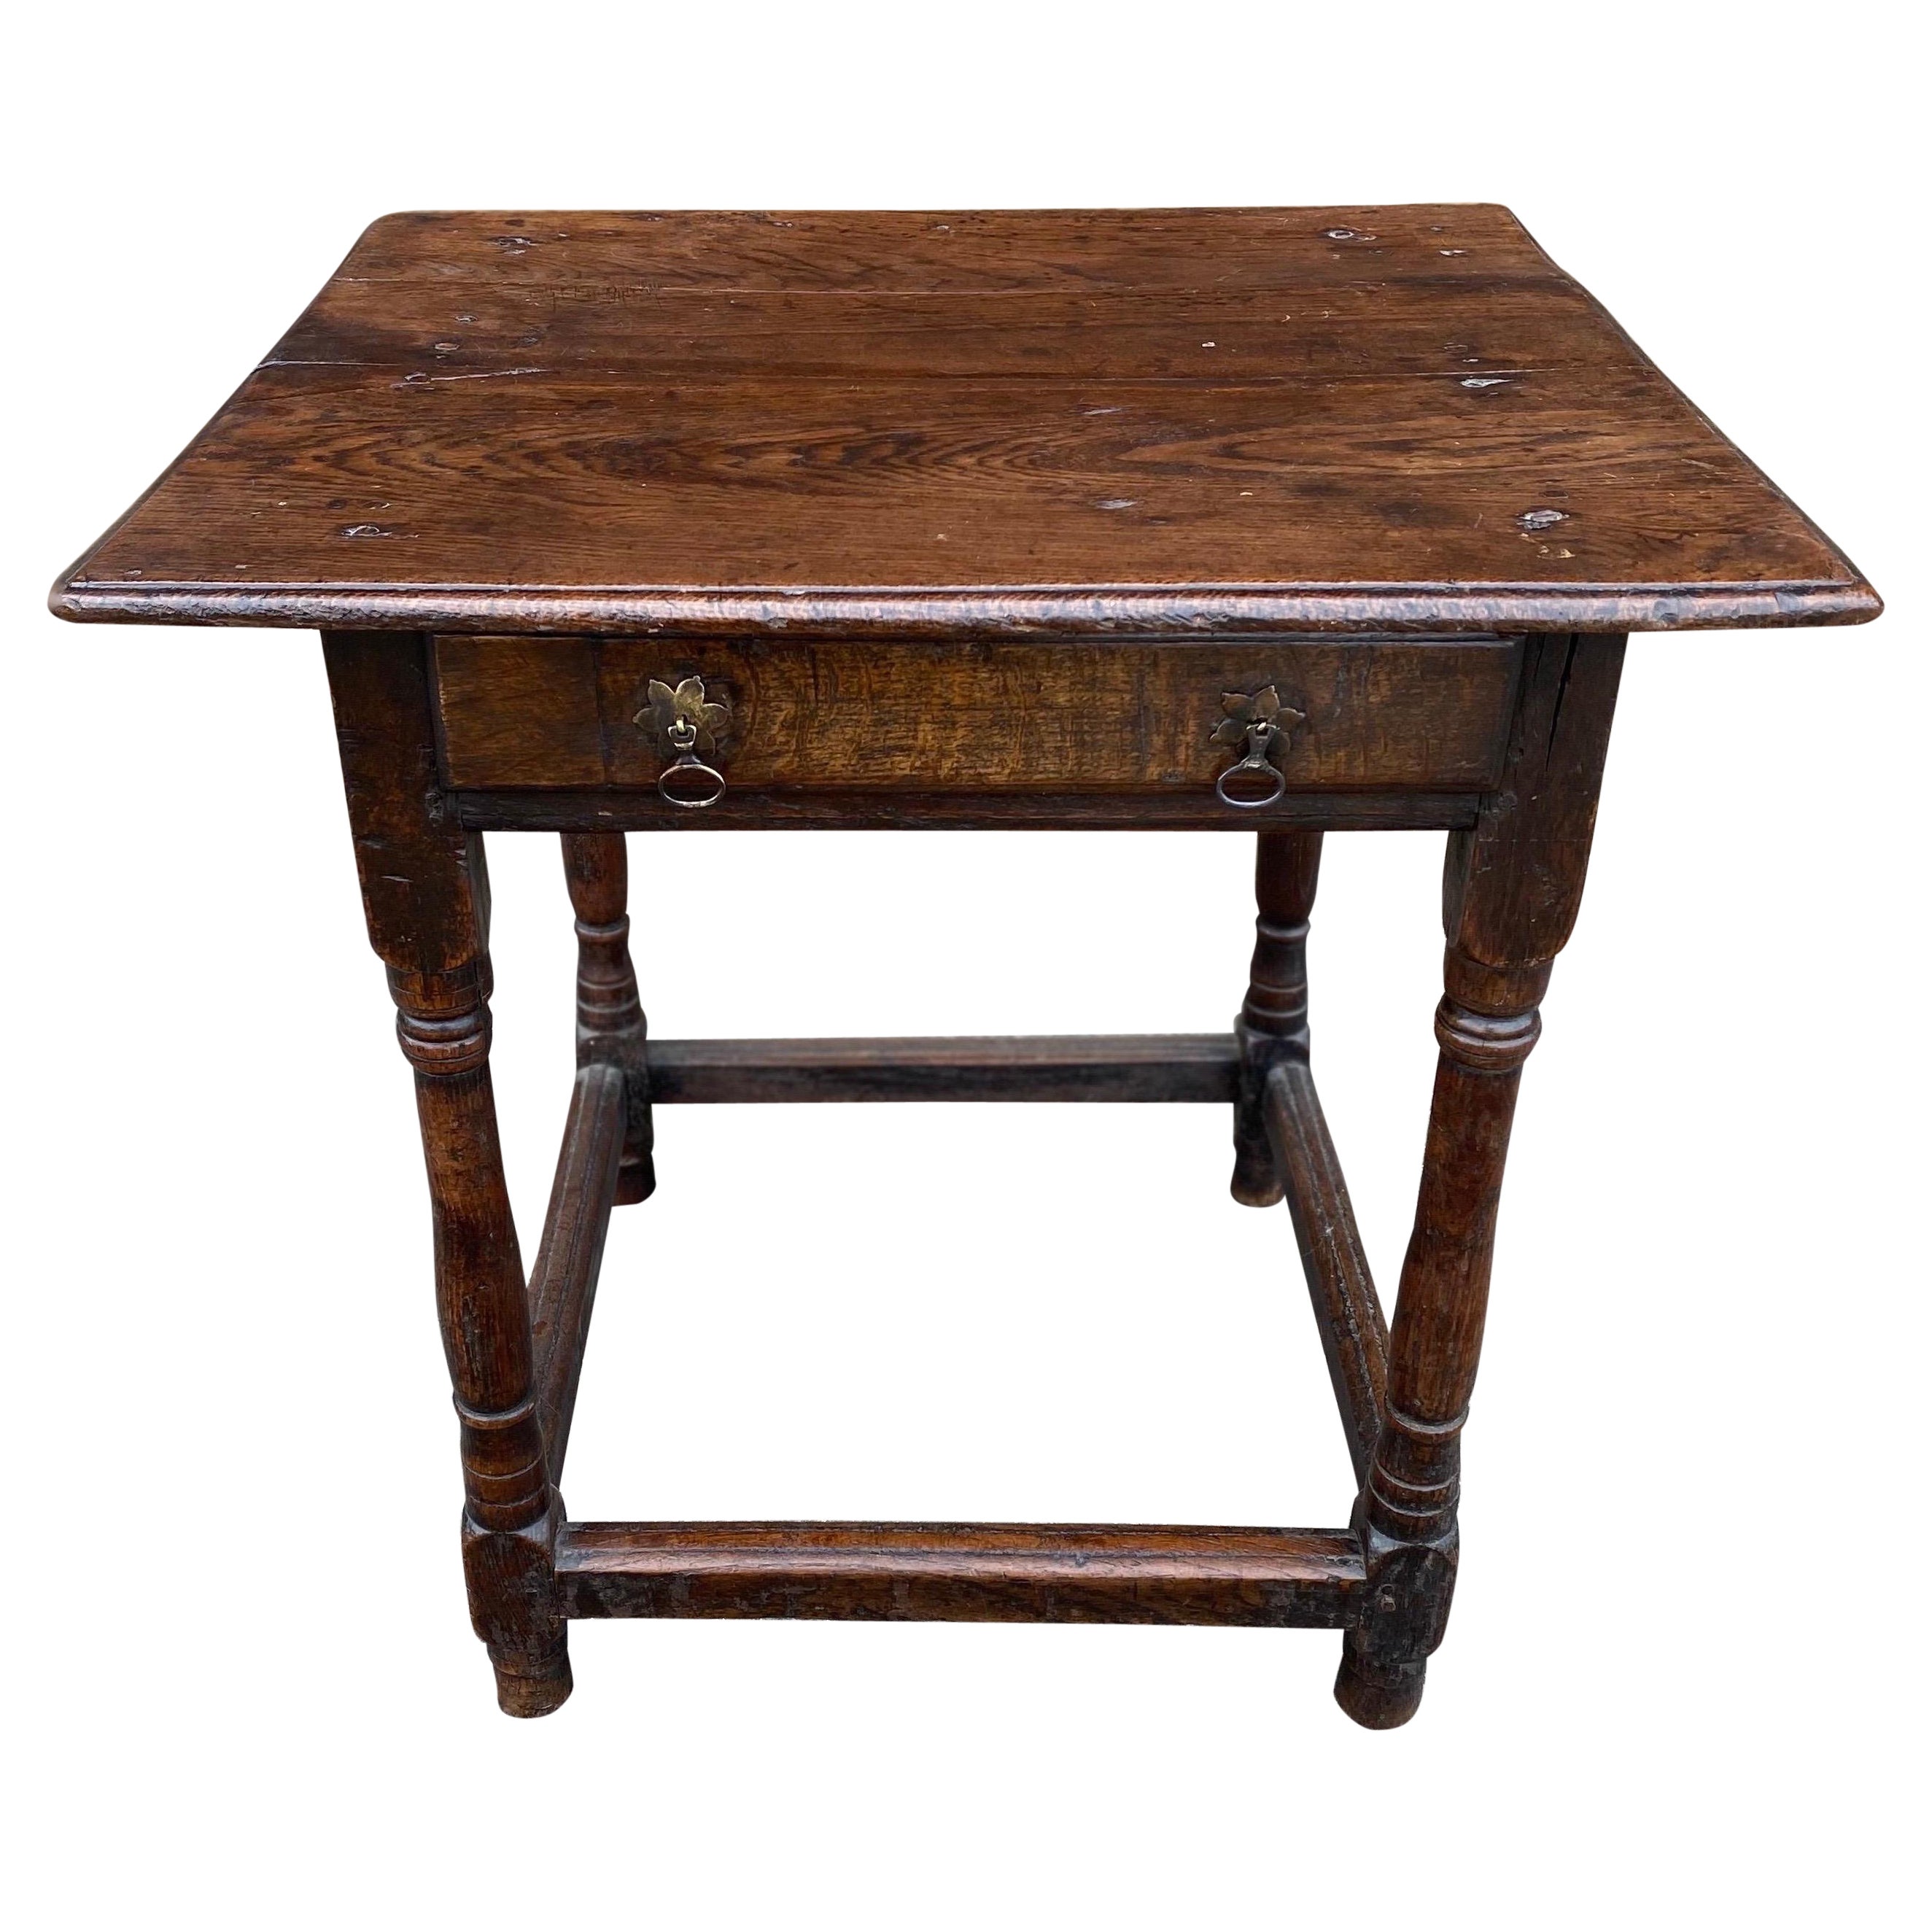 Very Early 18th Century English Oak Joint Table with Drawer